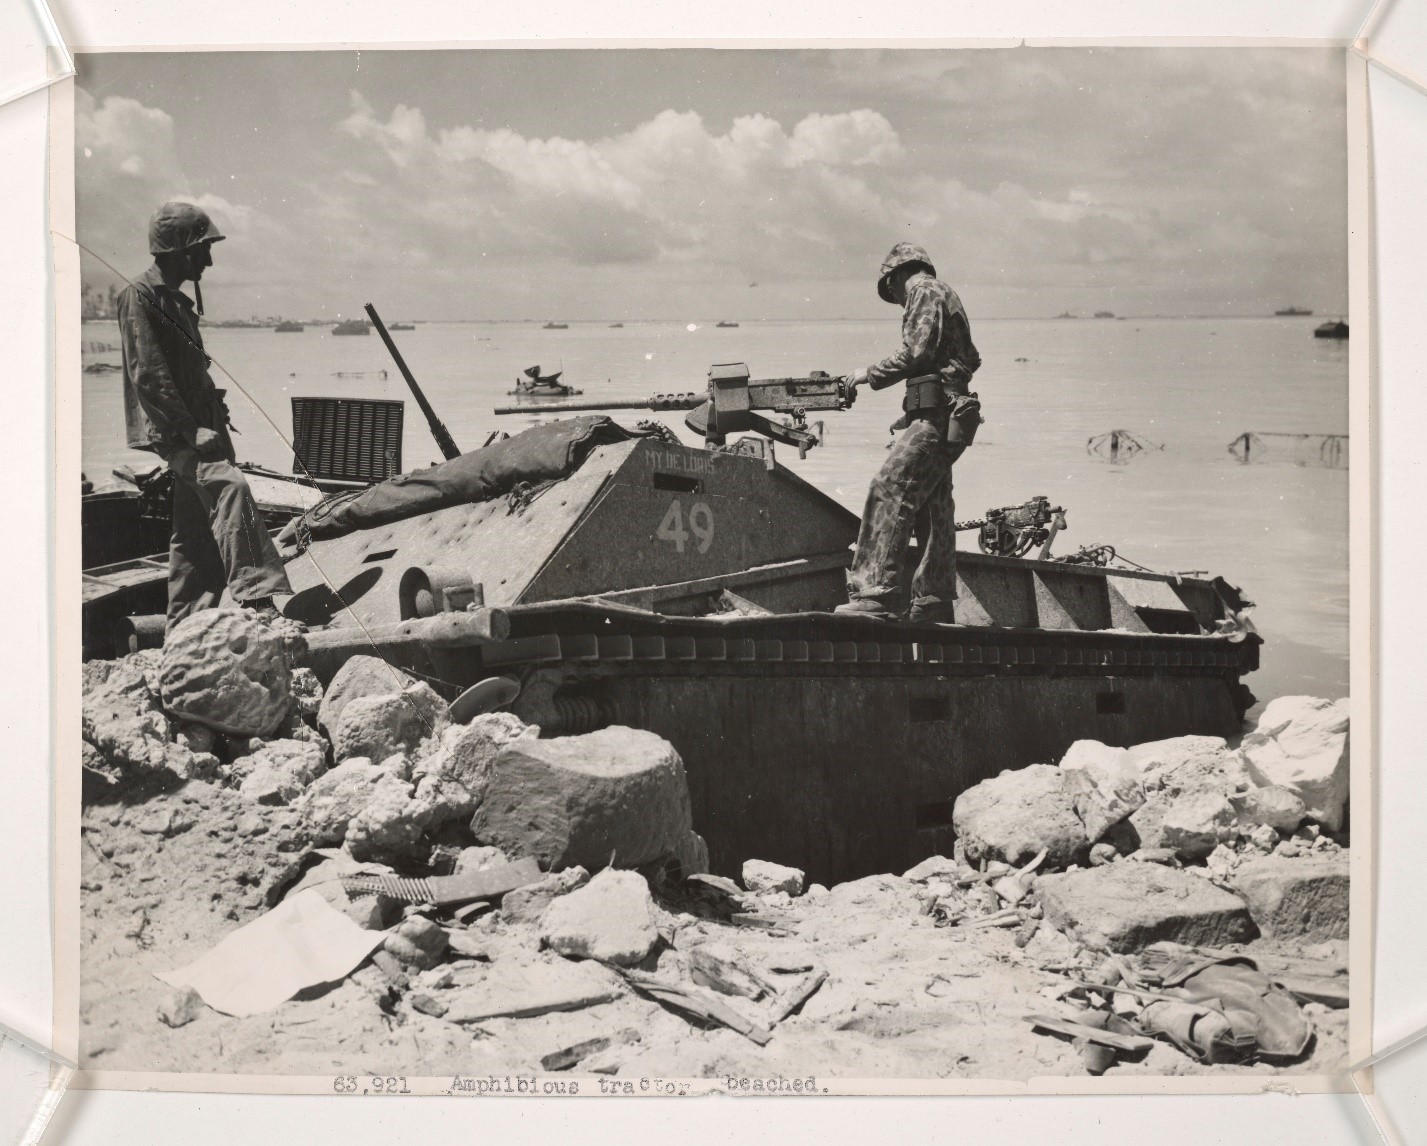 Disabled amphibious tractors at the junction of Red Beach #1 and #2, Betio, Tarawa Atoll.